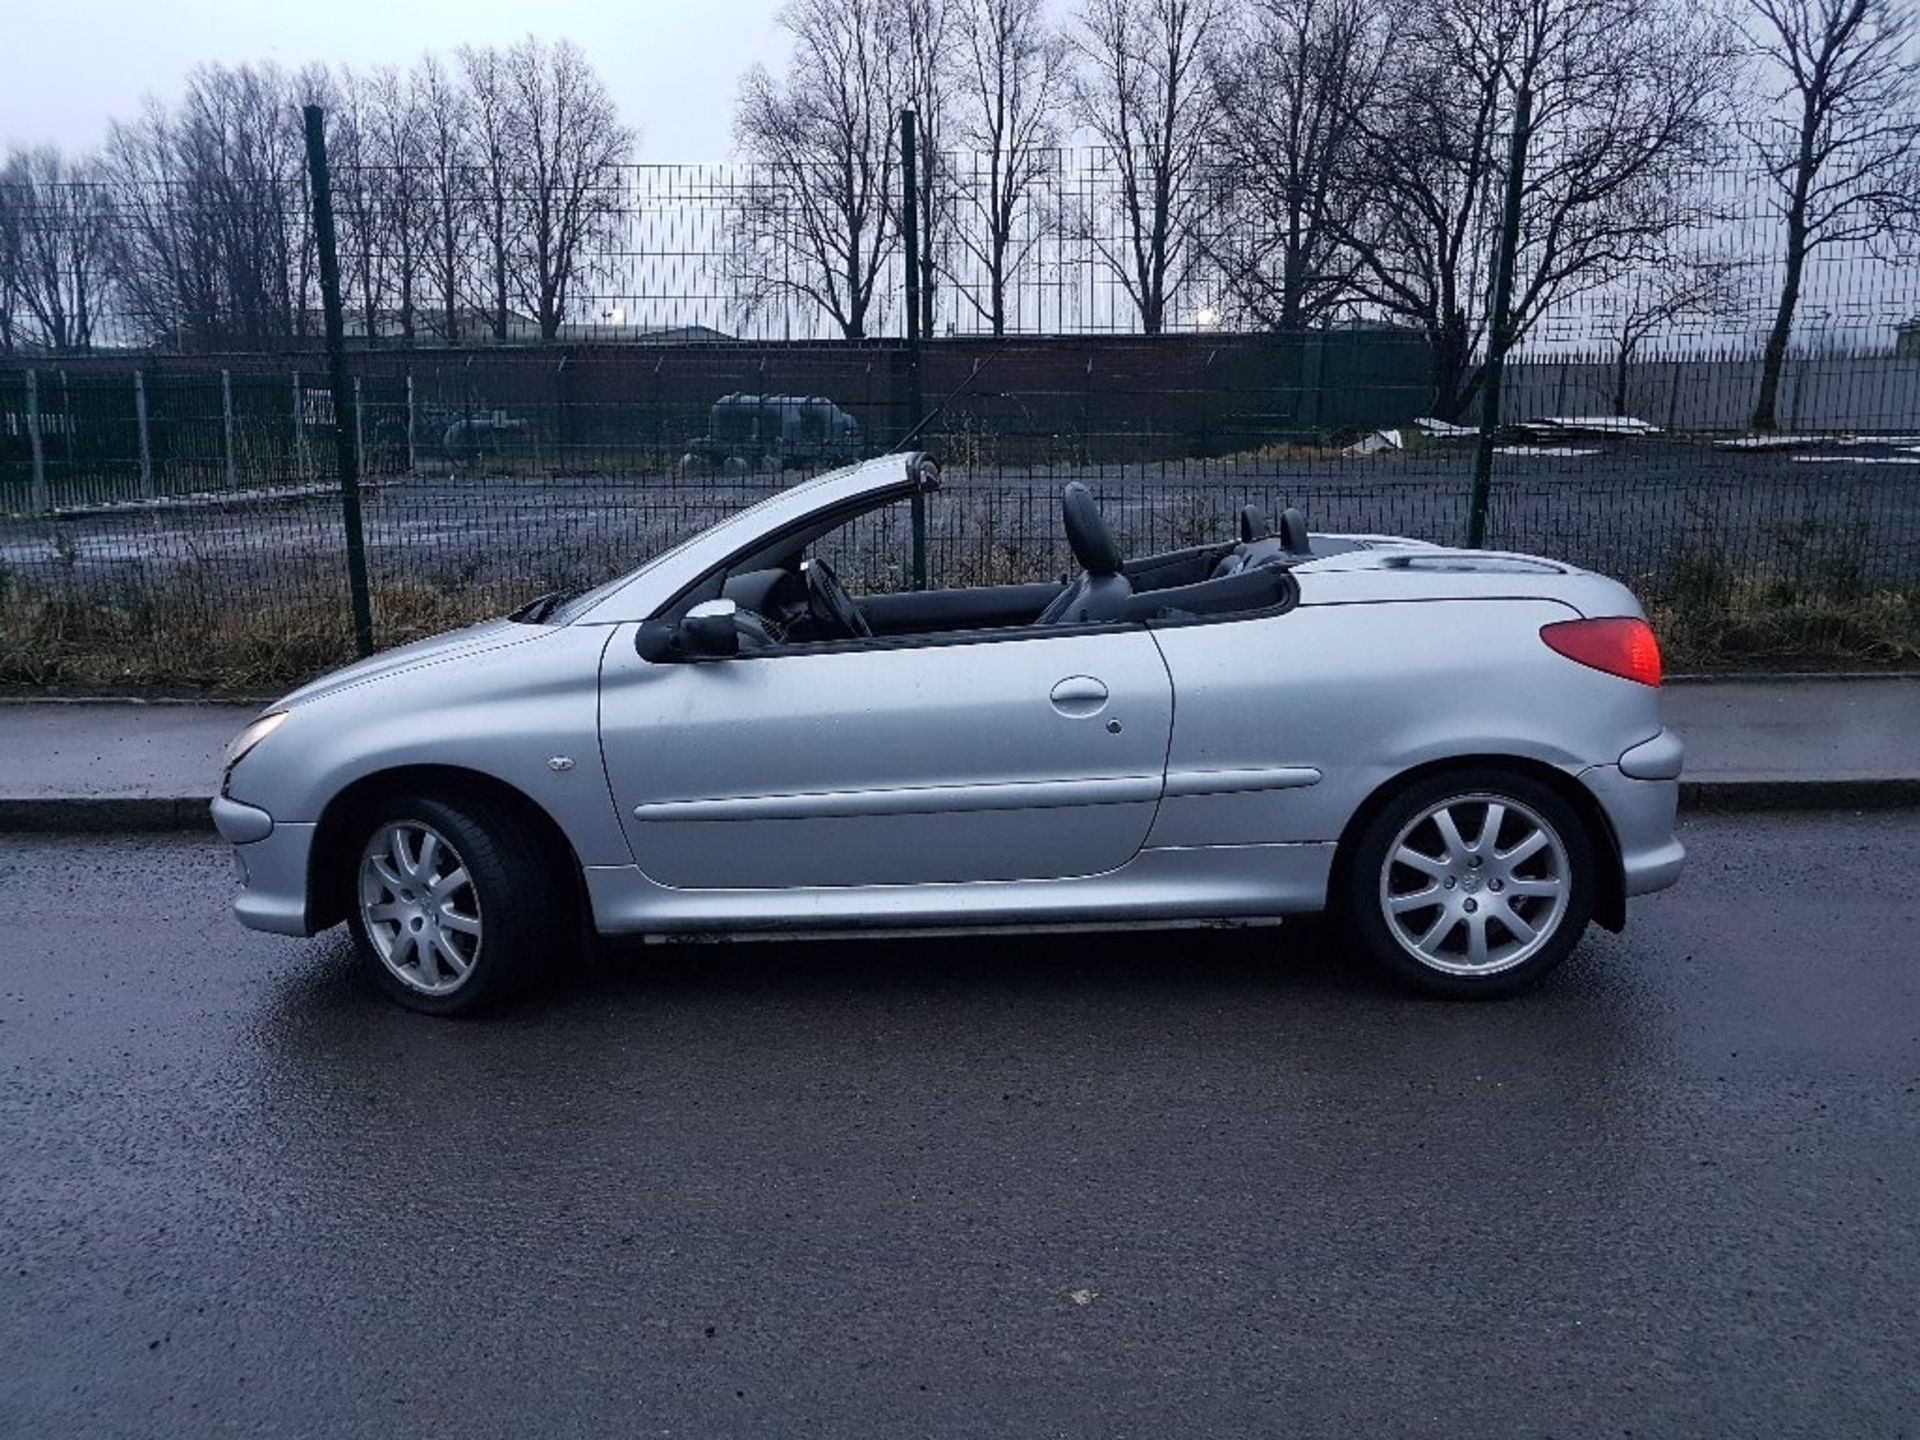 PEUGEOT, 206CC ALLURE HDI, MH05 DZV, FIRST DATE OF REGISTRATION 15/08/2005, 1.6 LITRE, DIESEL, - Image 14 of 14